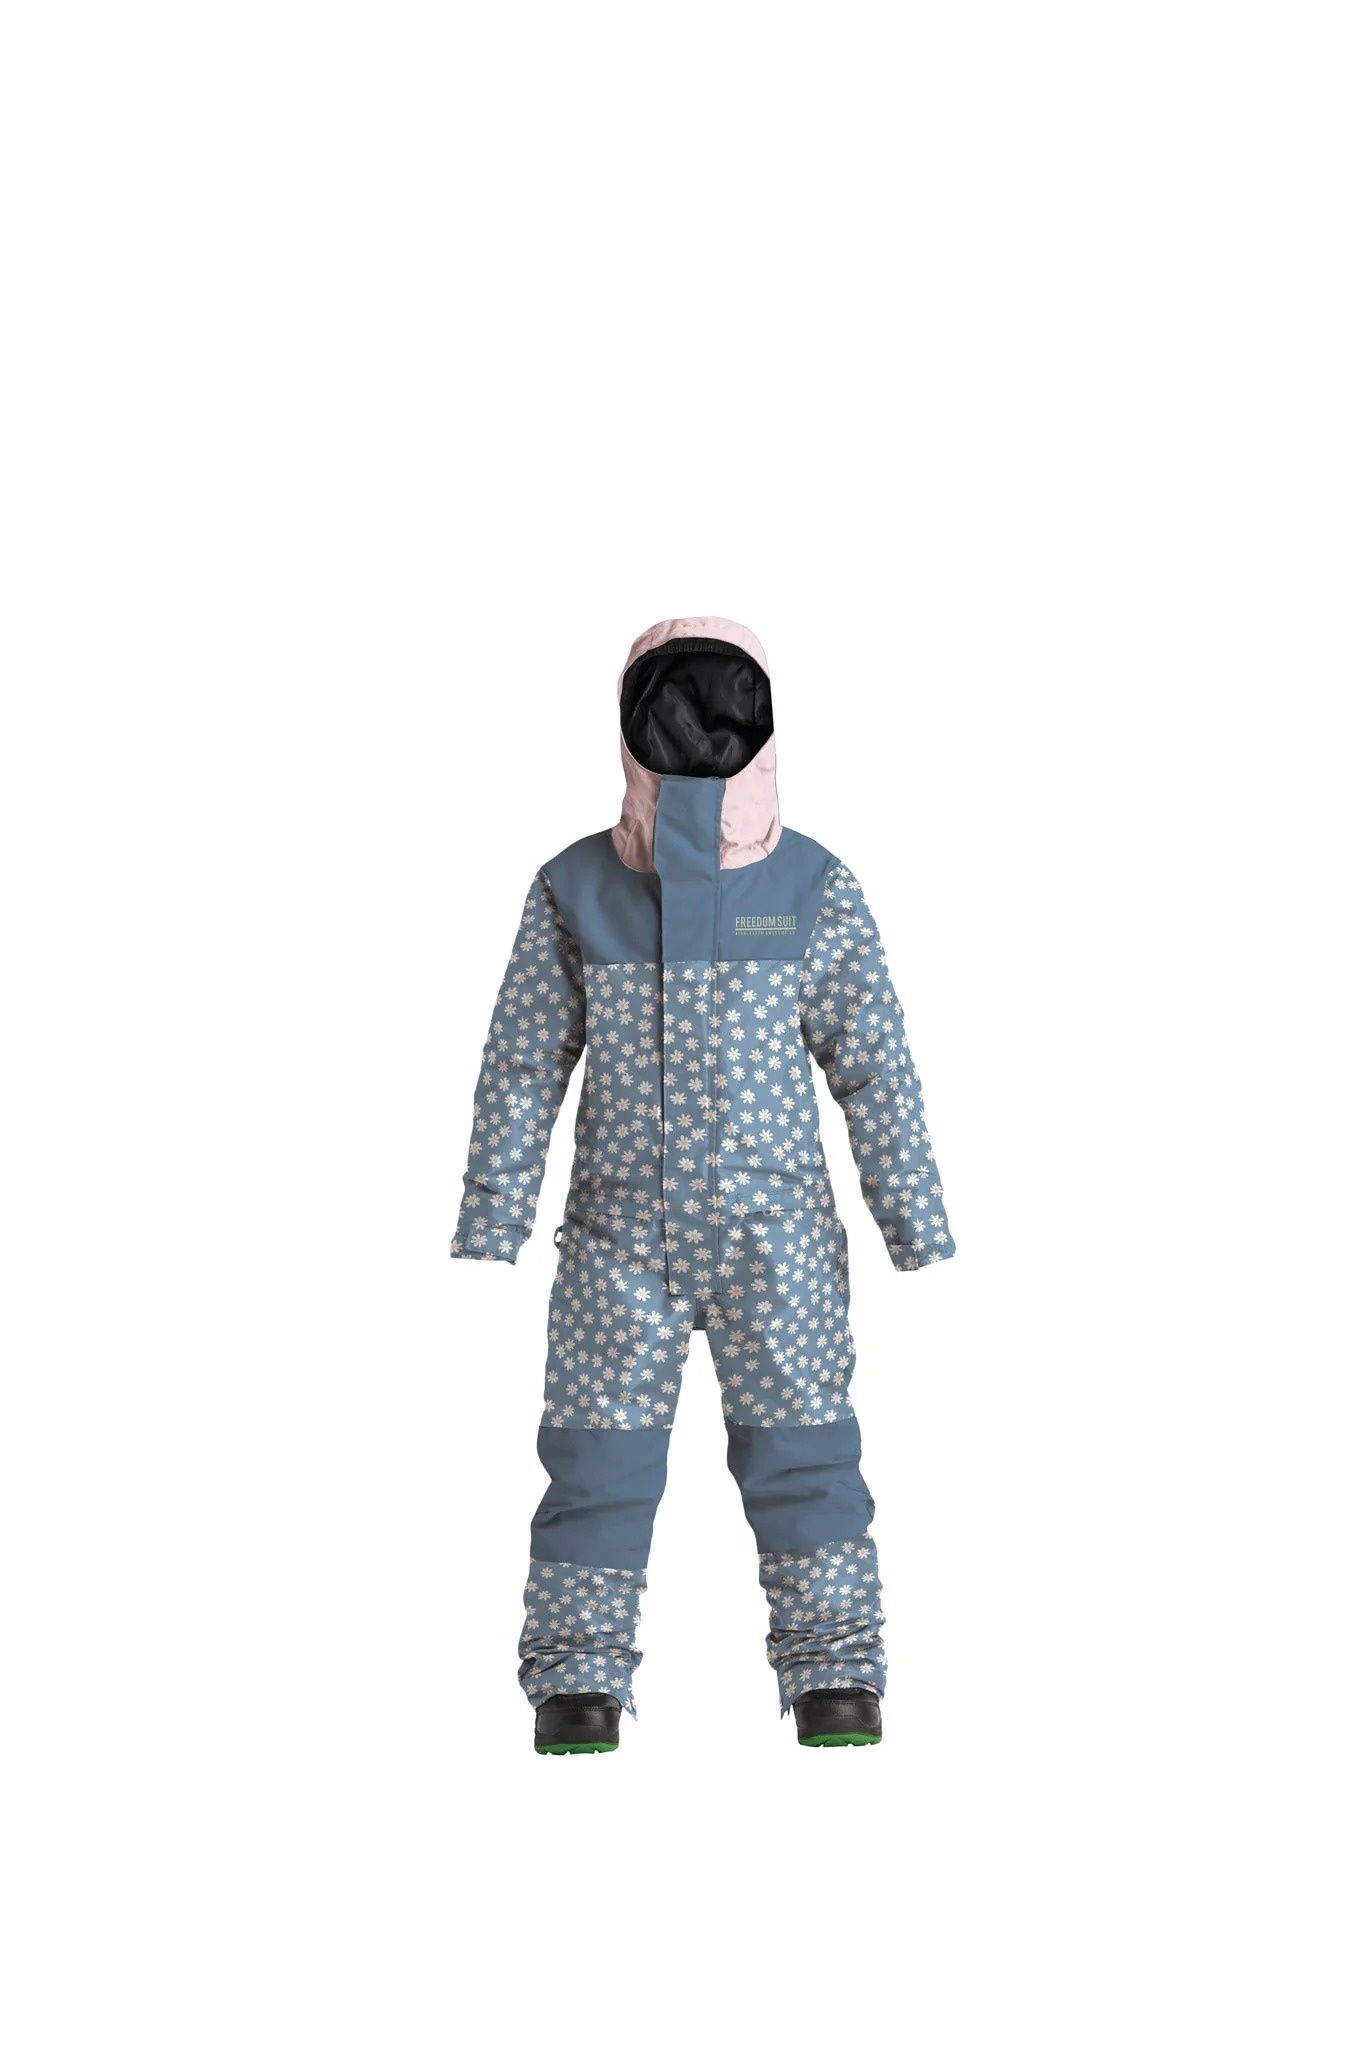 Airblaster YOUTH FREEDOM SUIT 1PC